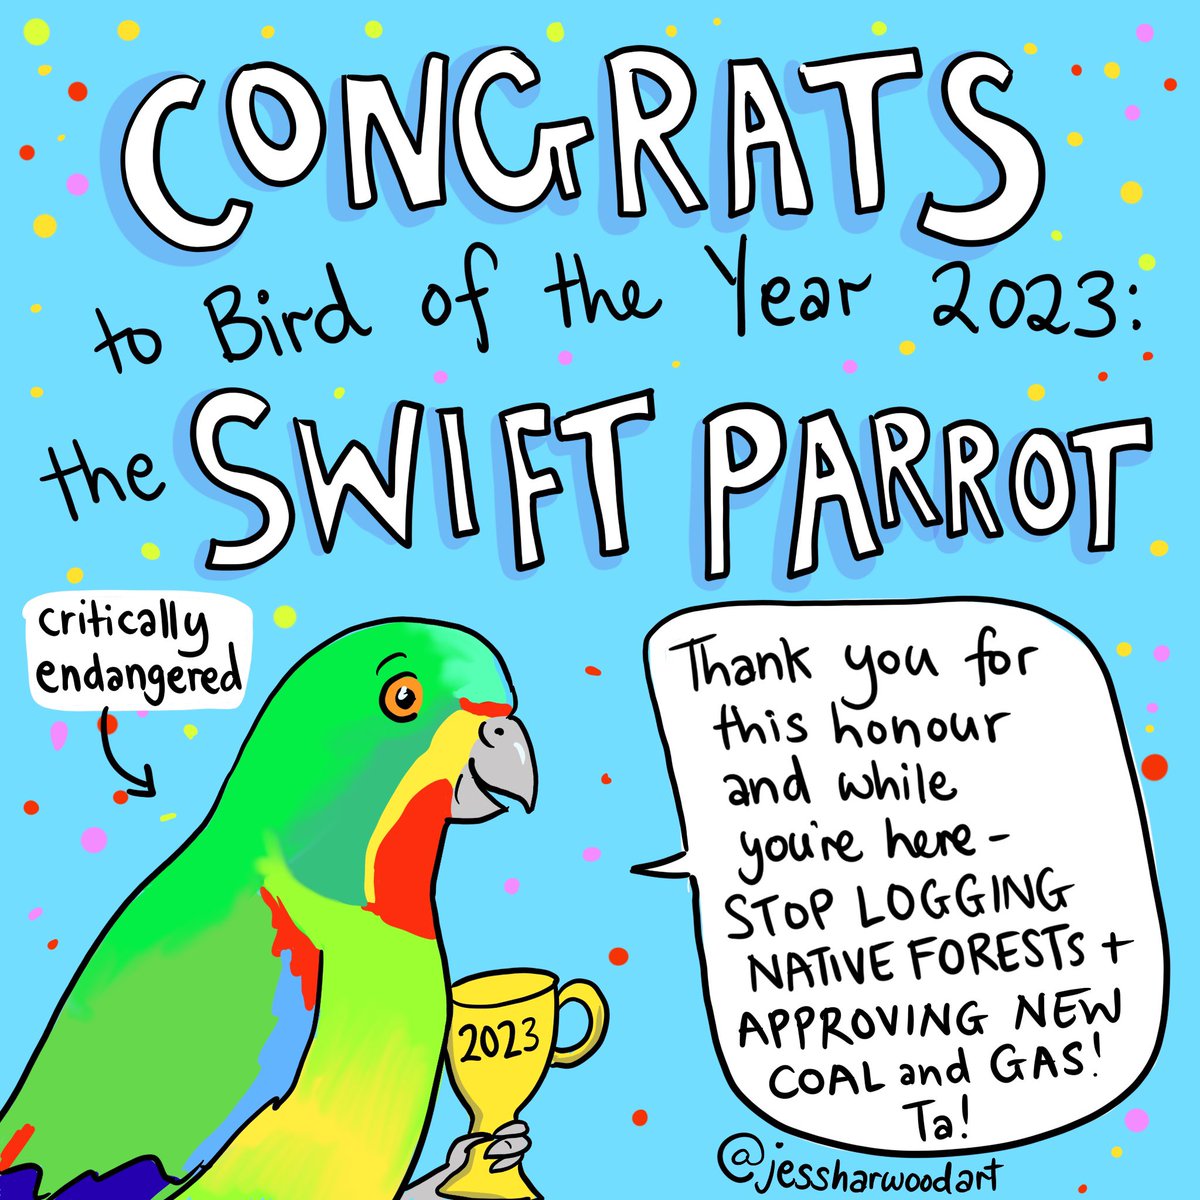 Congrats swifties! The people have spoken in the 2023 @GuardianAus @BirdlifeOz Bird of the Year vote - fraudulent turkeys, birds soaring and diving into the finals, it’s been quite exciting. Please help protect swift parrots - there’s only a few hundred left! #BirdofTheYear